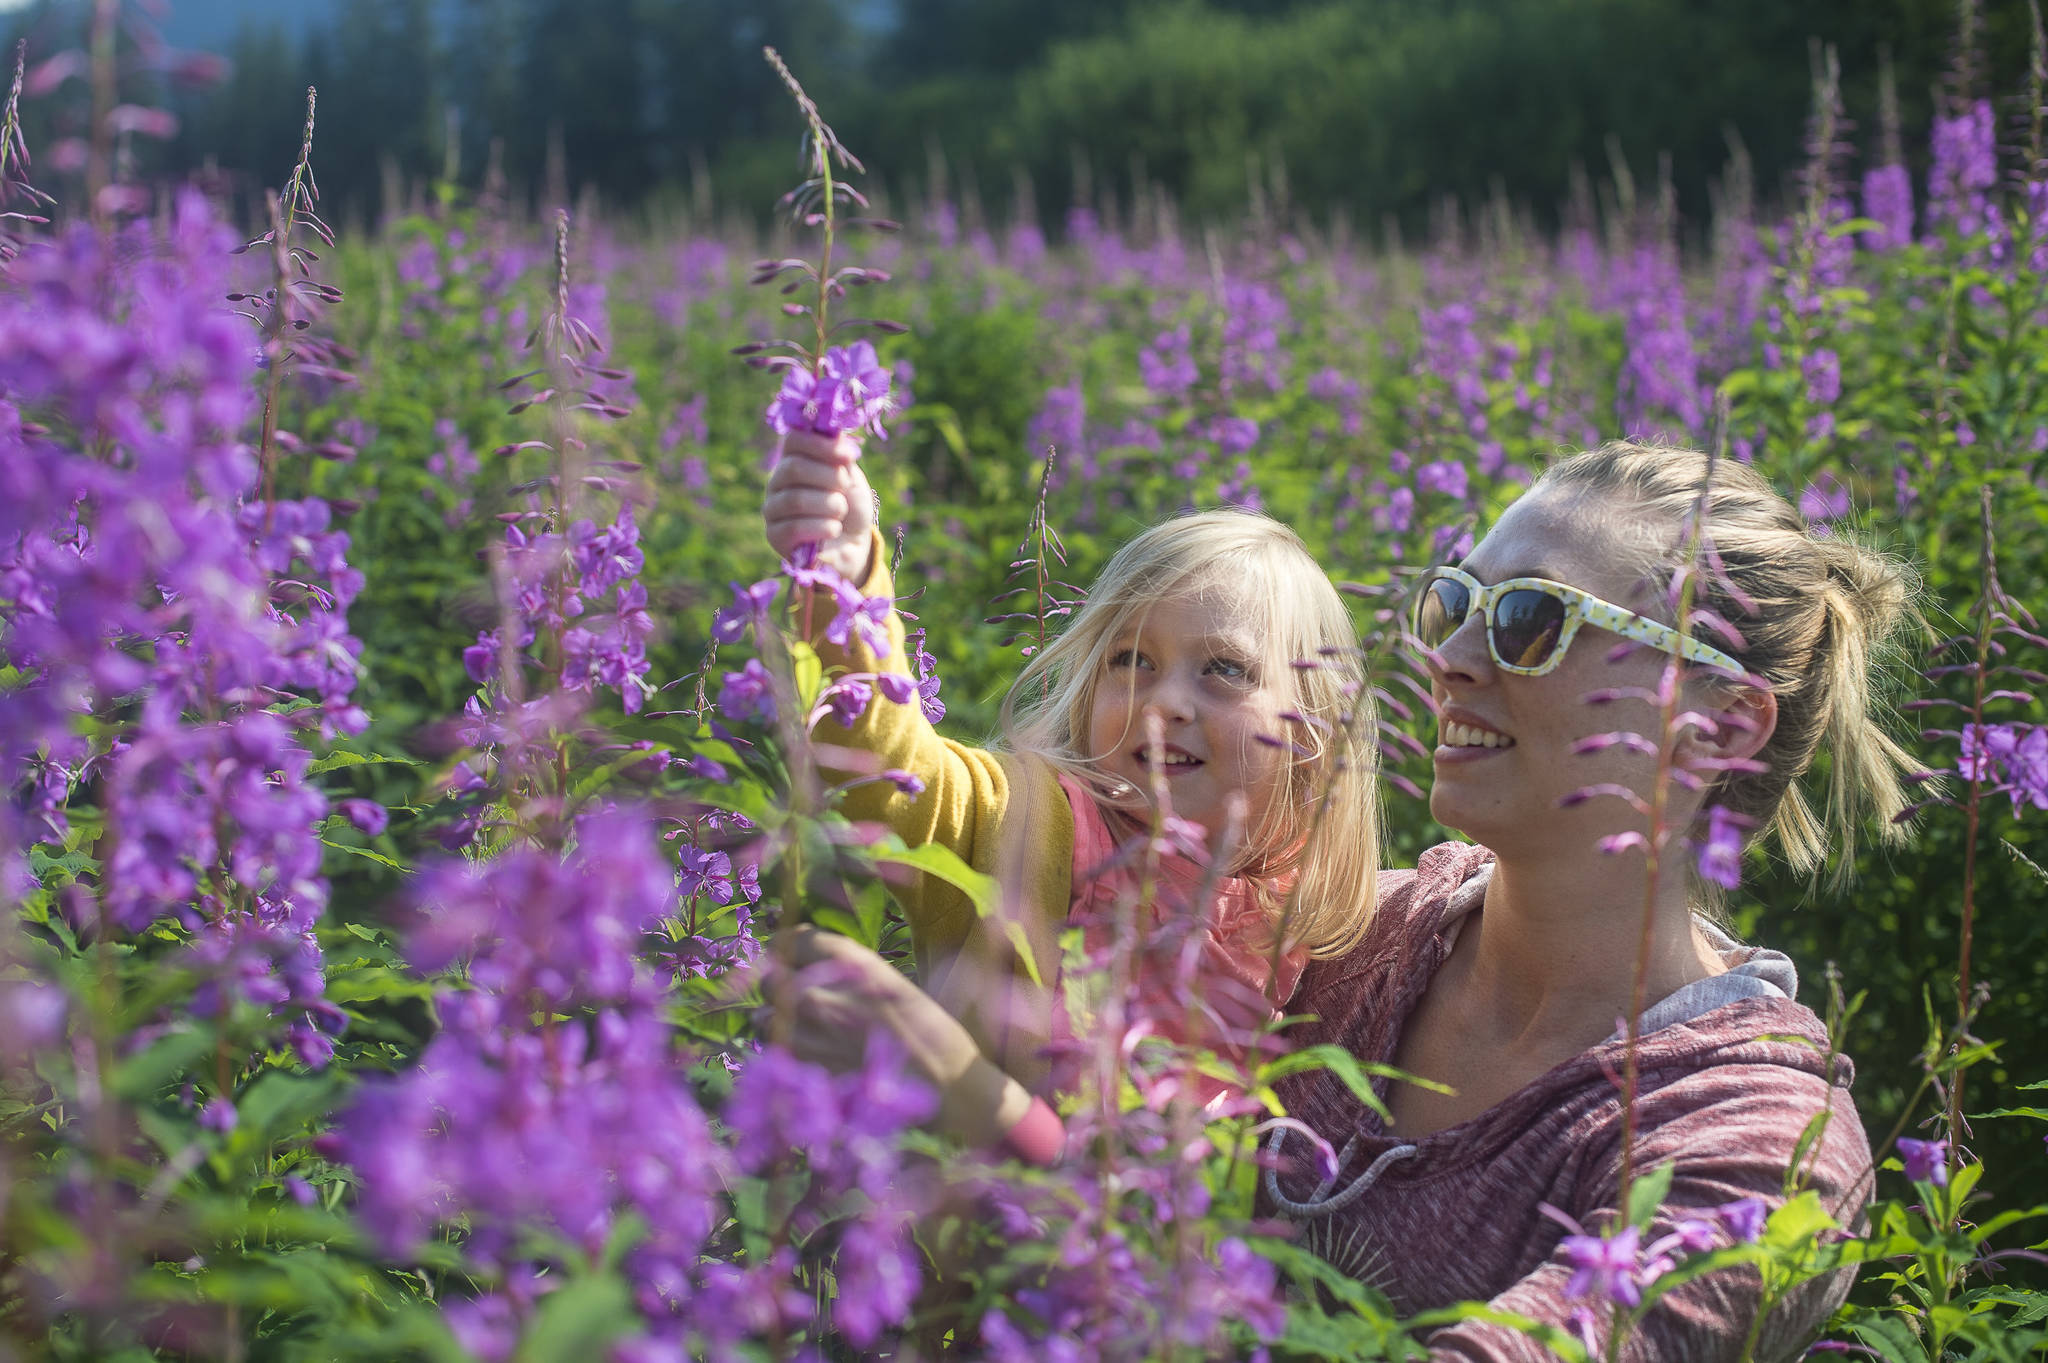 Jessica Keeler and her daughter, Lilly, 3, pick fireweed petals at Kaxdigoowu Héen Dei Park to make jelly on Monday, July 23, 2018. (Michael Penn | Juneau Empire)